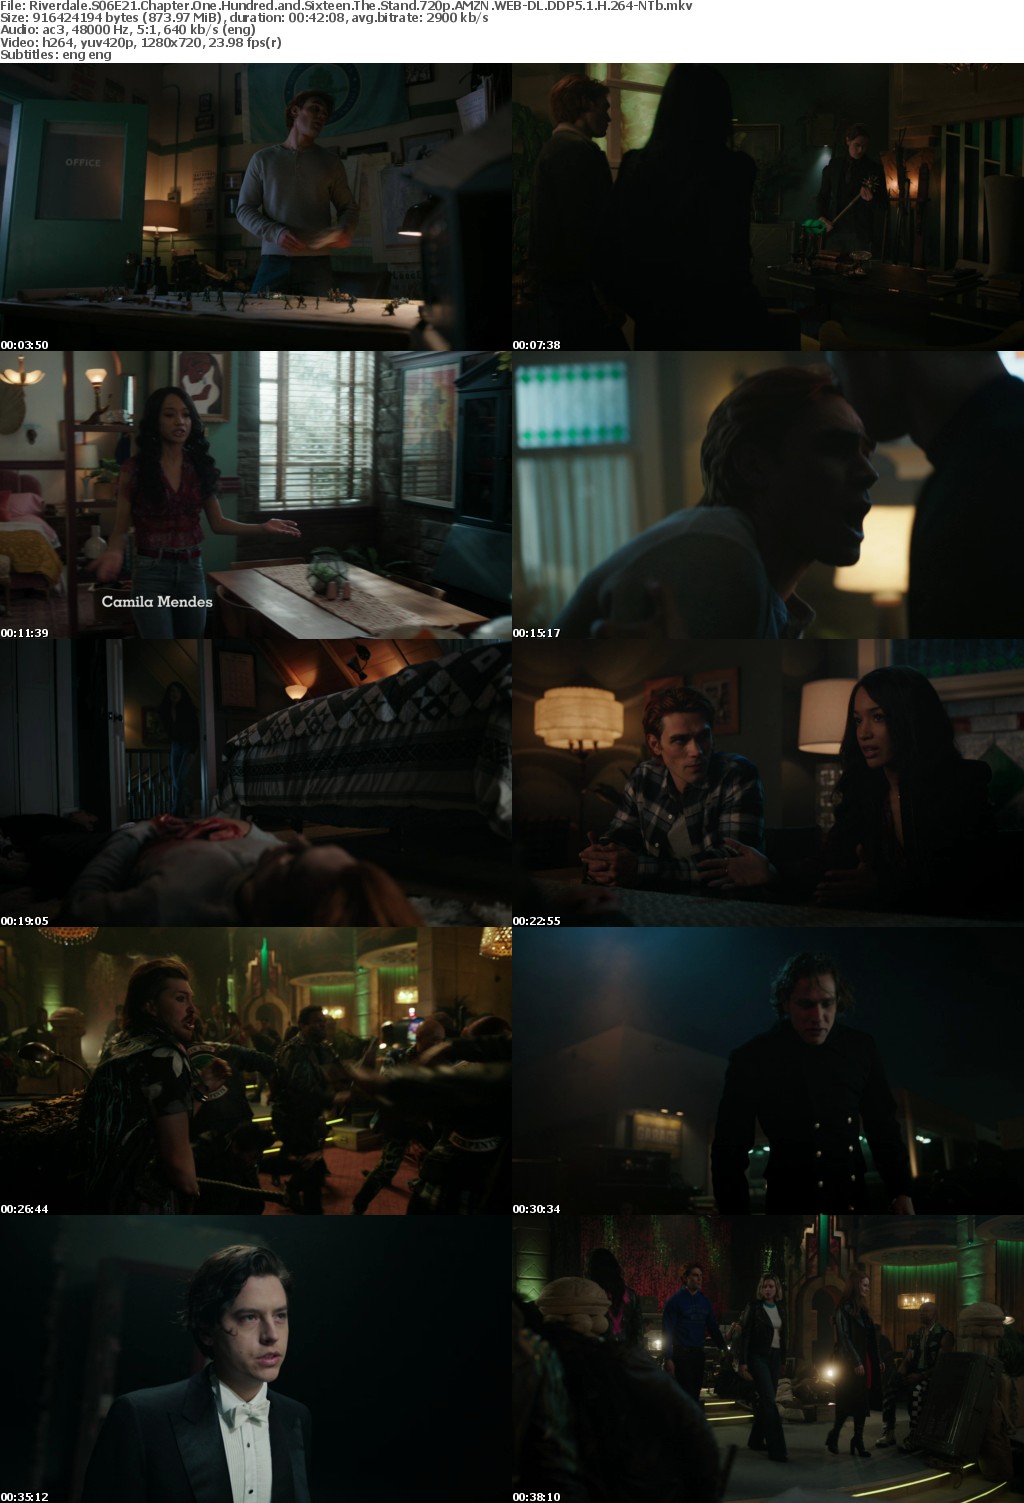 Riverdale US S06E21 Chapter One Hundred and Sixteen The Stand 720p AMZN WEBRip DDP5 1 x264-NTb